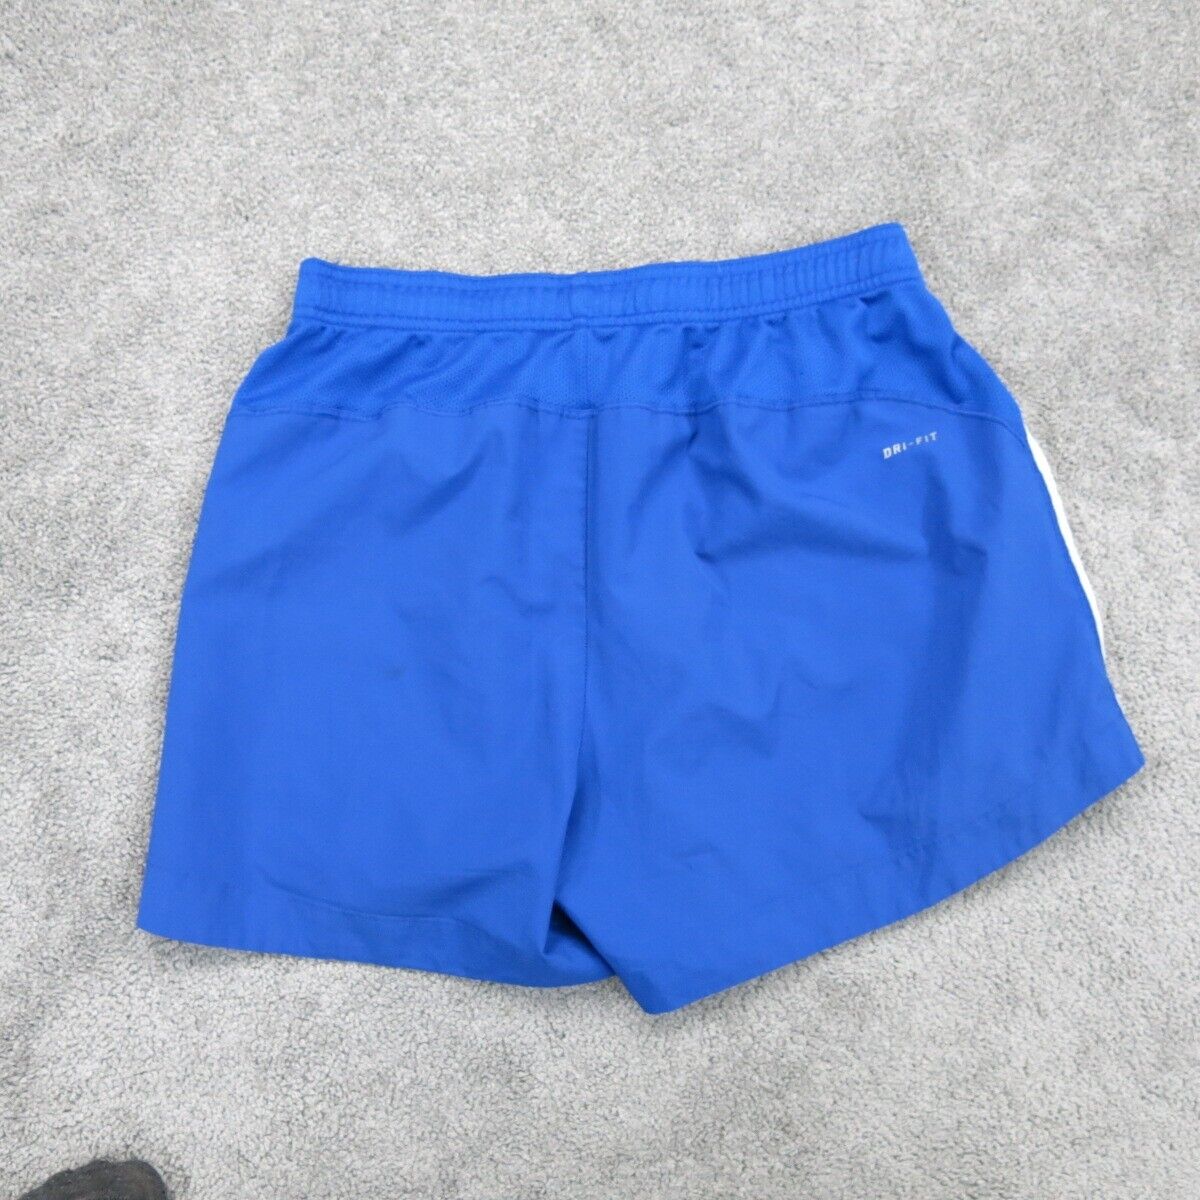 Nike Womens DRI FIT Activewear Running Shorts High Rise Light Blue Size Small